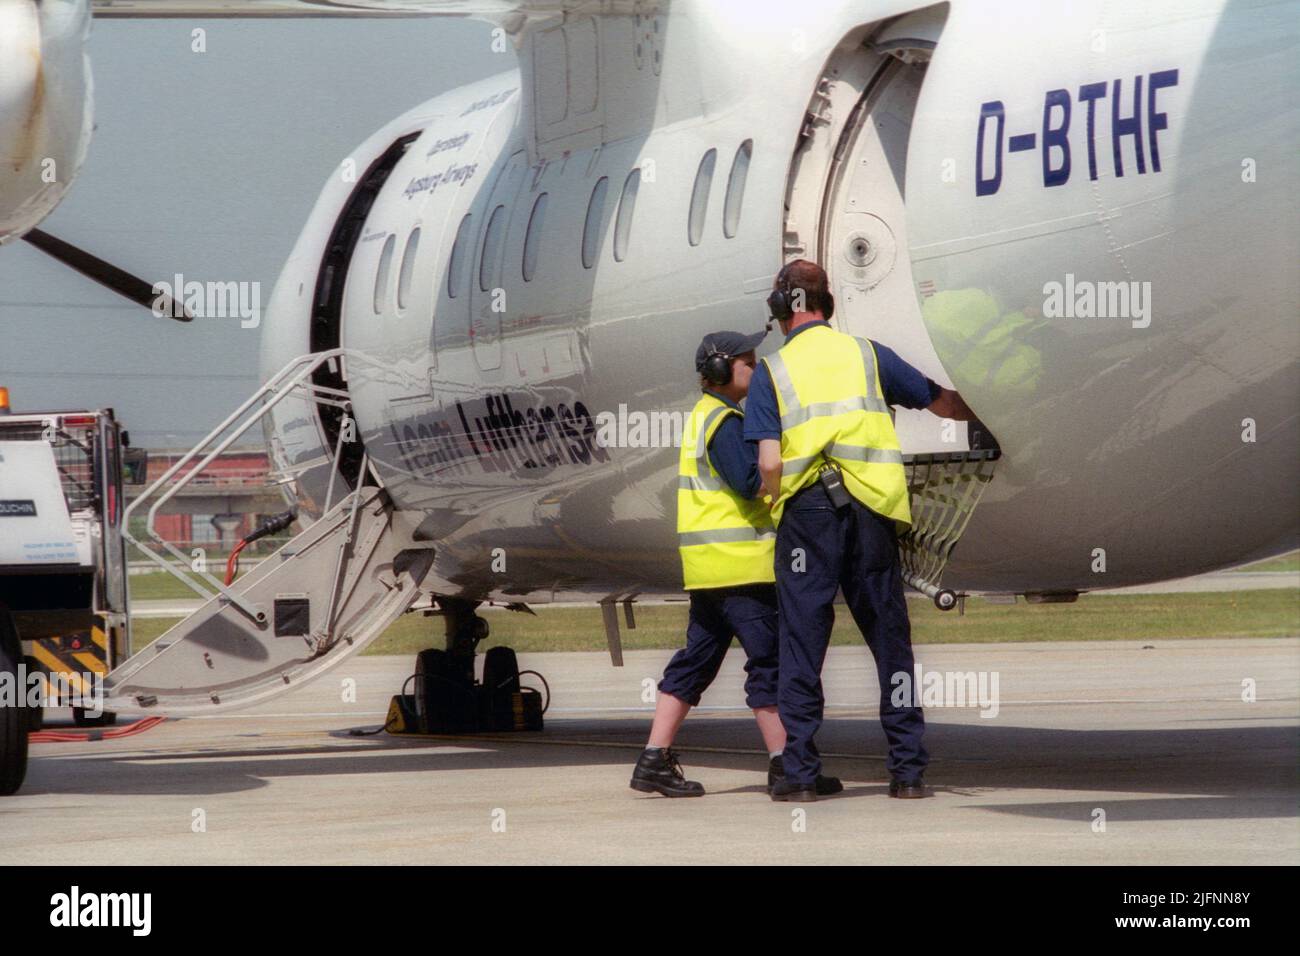 London City Airport ground crew preparing airplanes for flight on the gate. Stock Photo